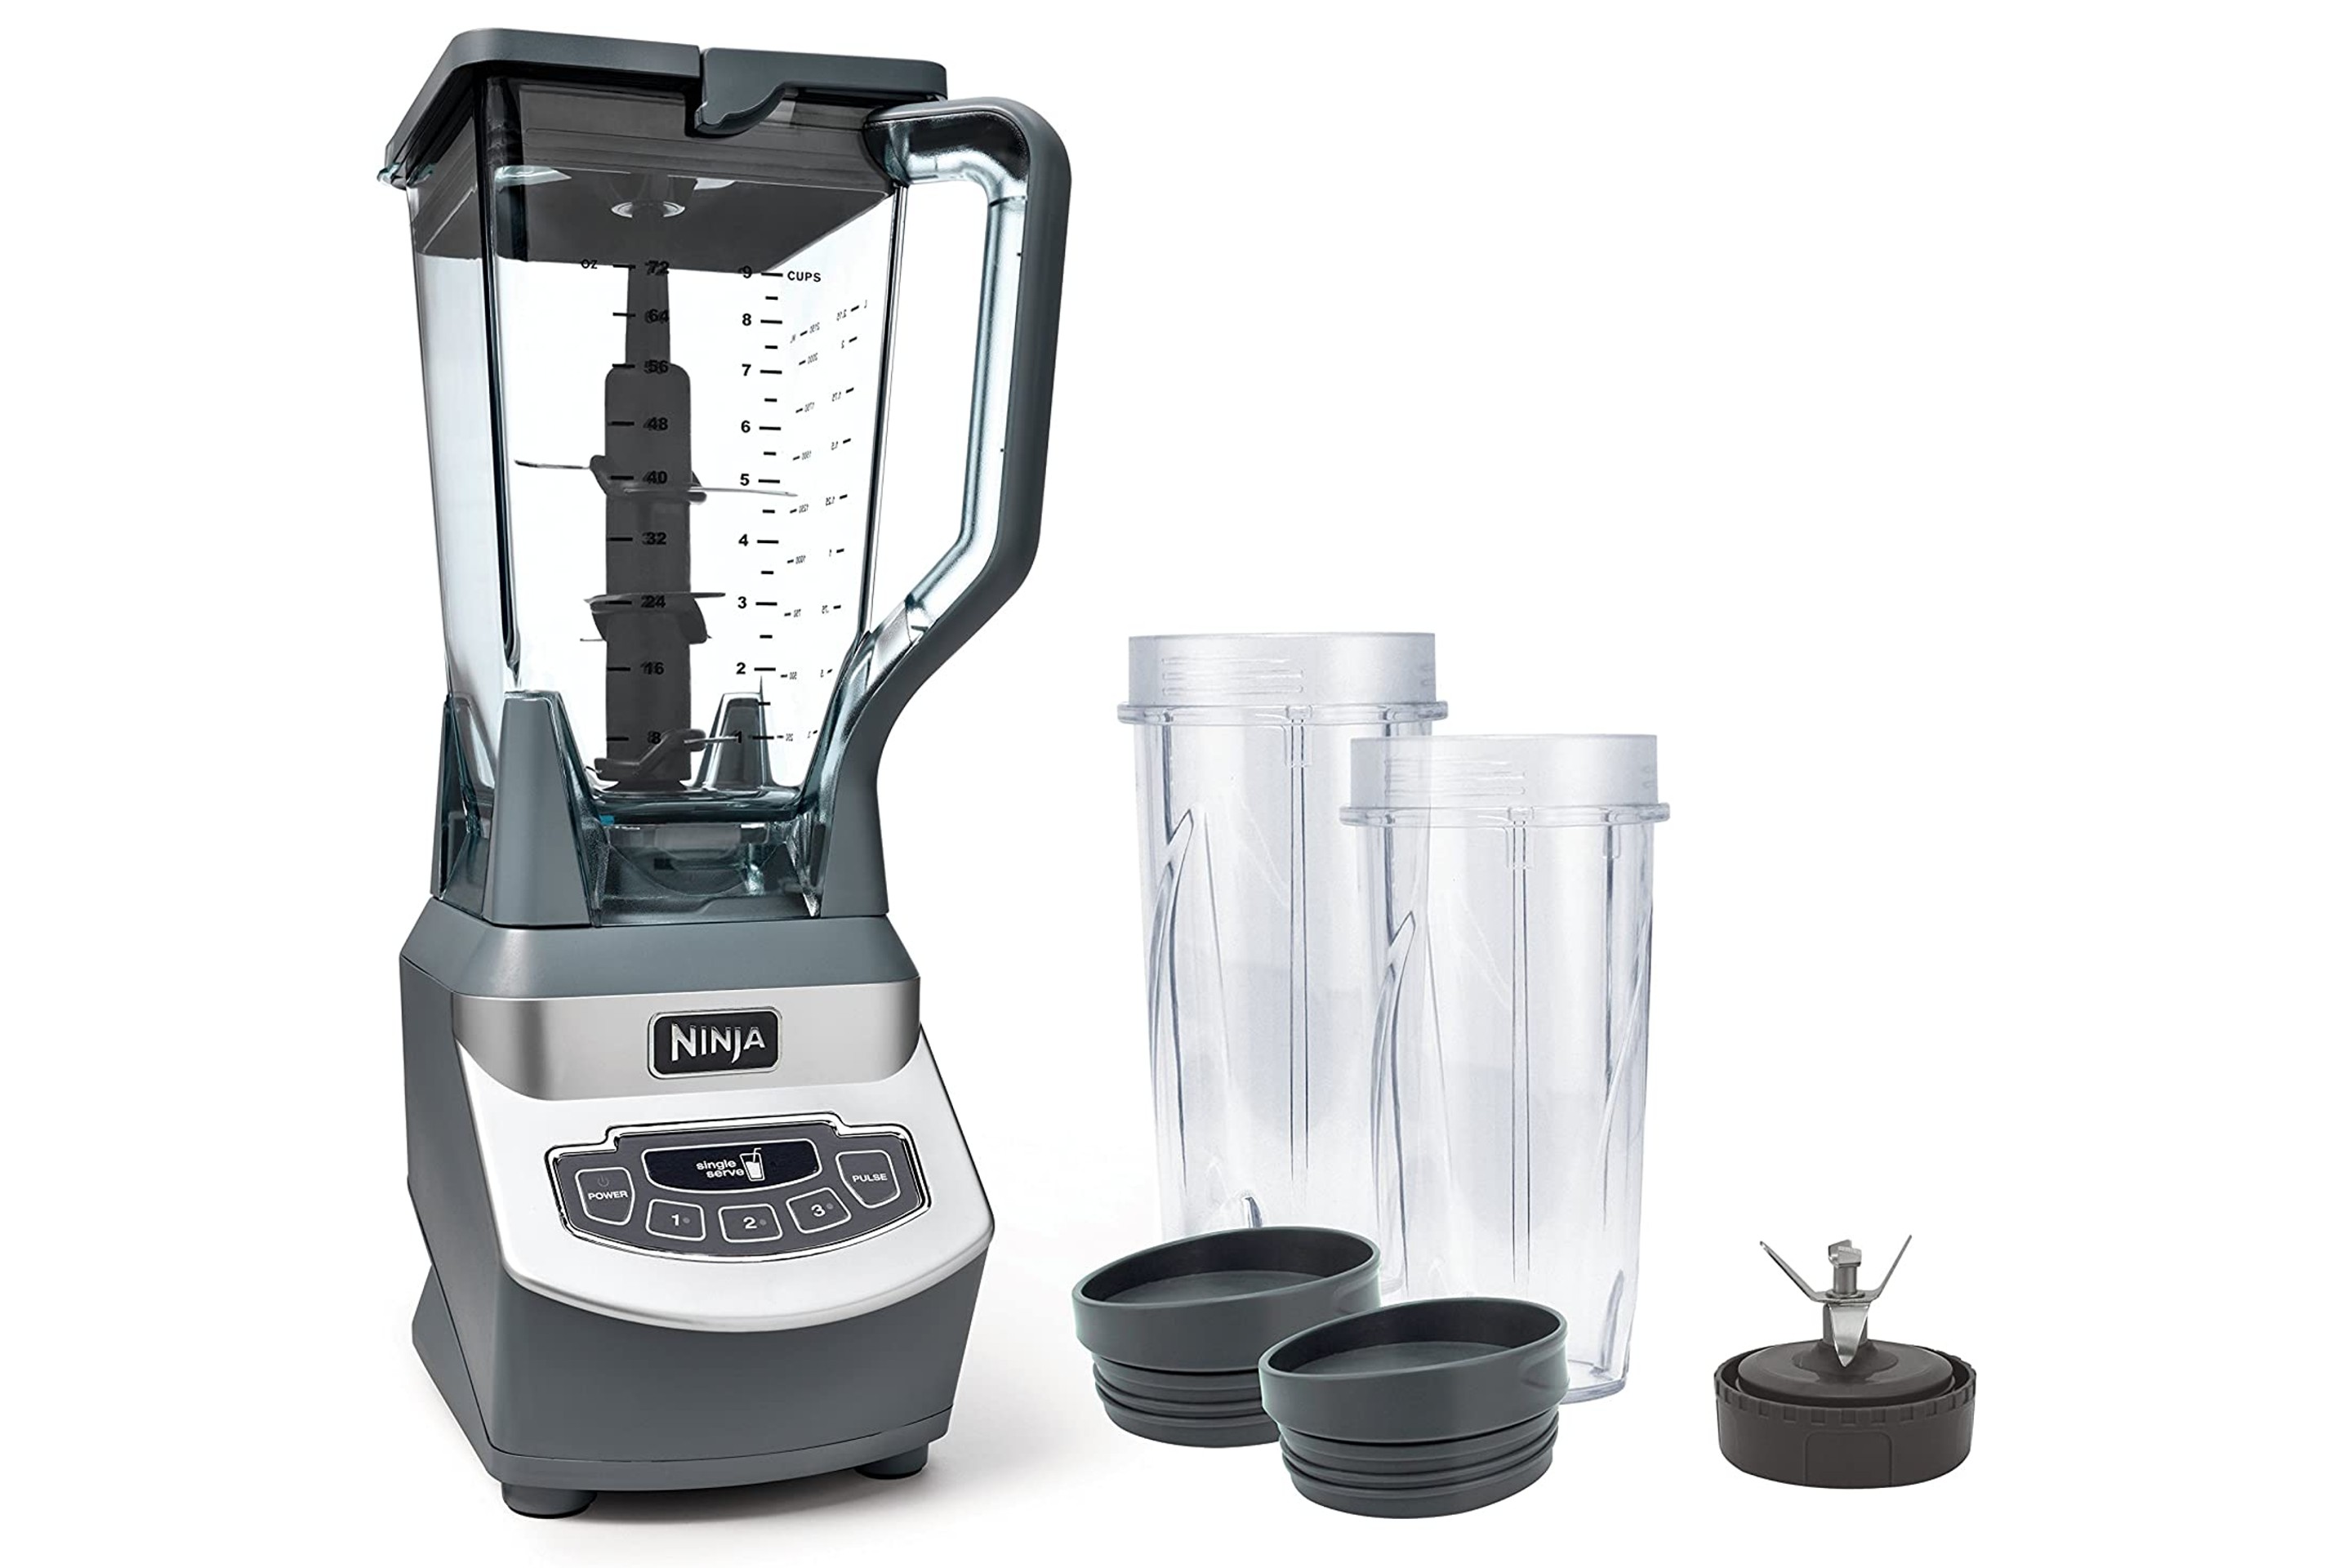 3 Types of Blenders: A Buying Guide